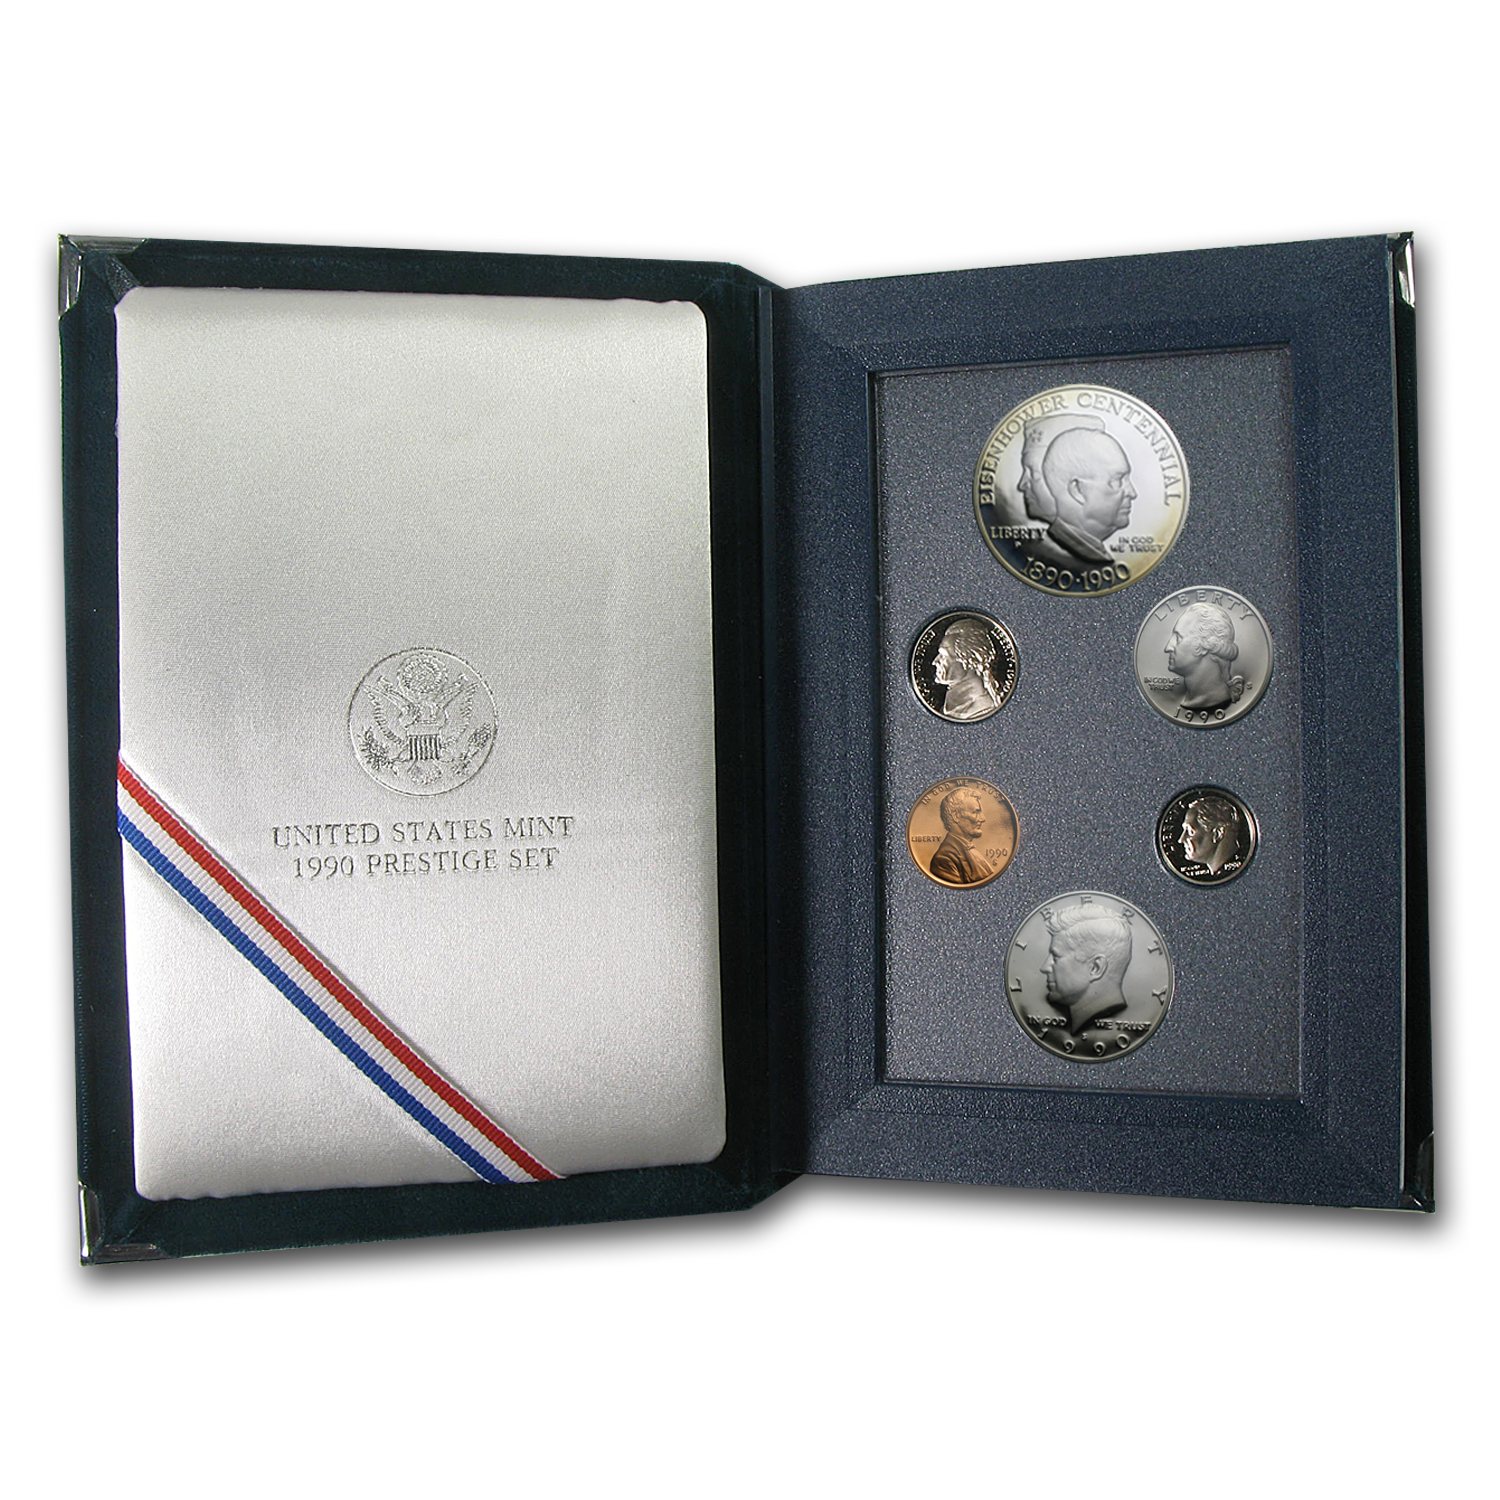 1990 EISENHOWER  US MINT SILVER COMMEMORATIVE PROOF  ALL